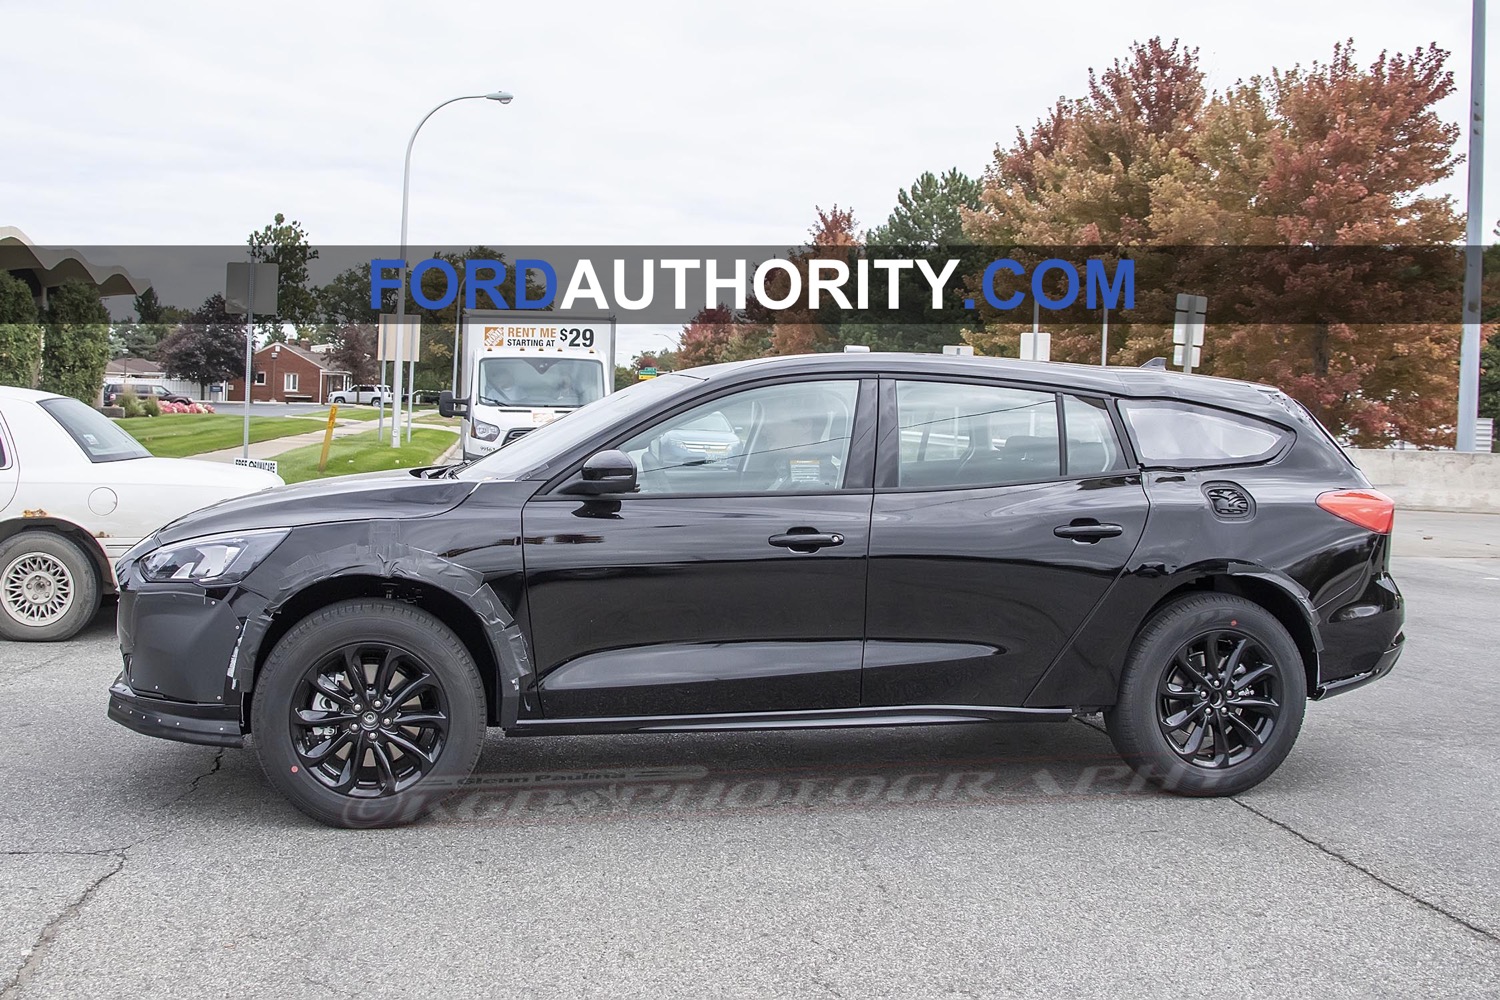 Ford Fusion Replacement Spied As Tall-Riding Wagon - Ford Authority